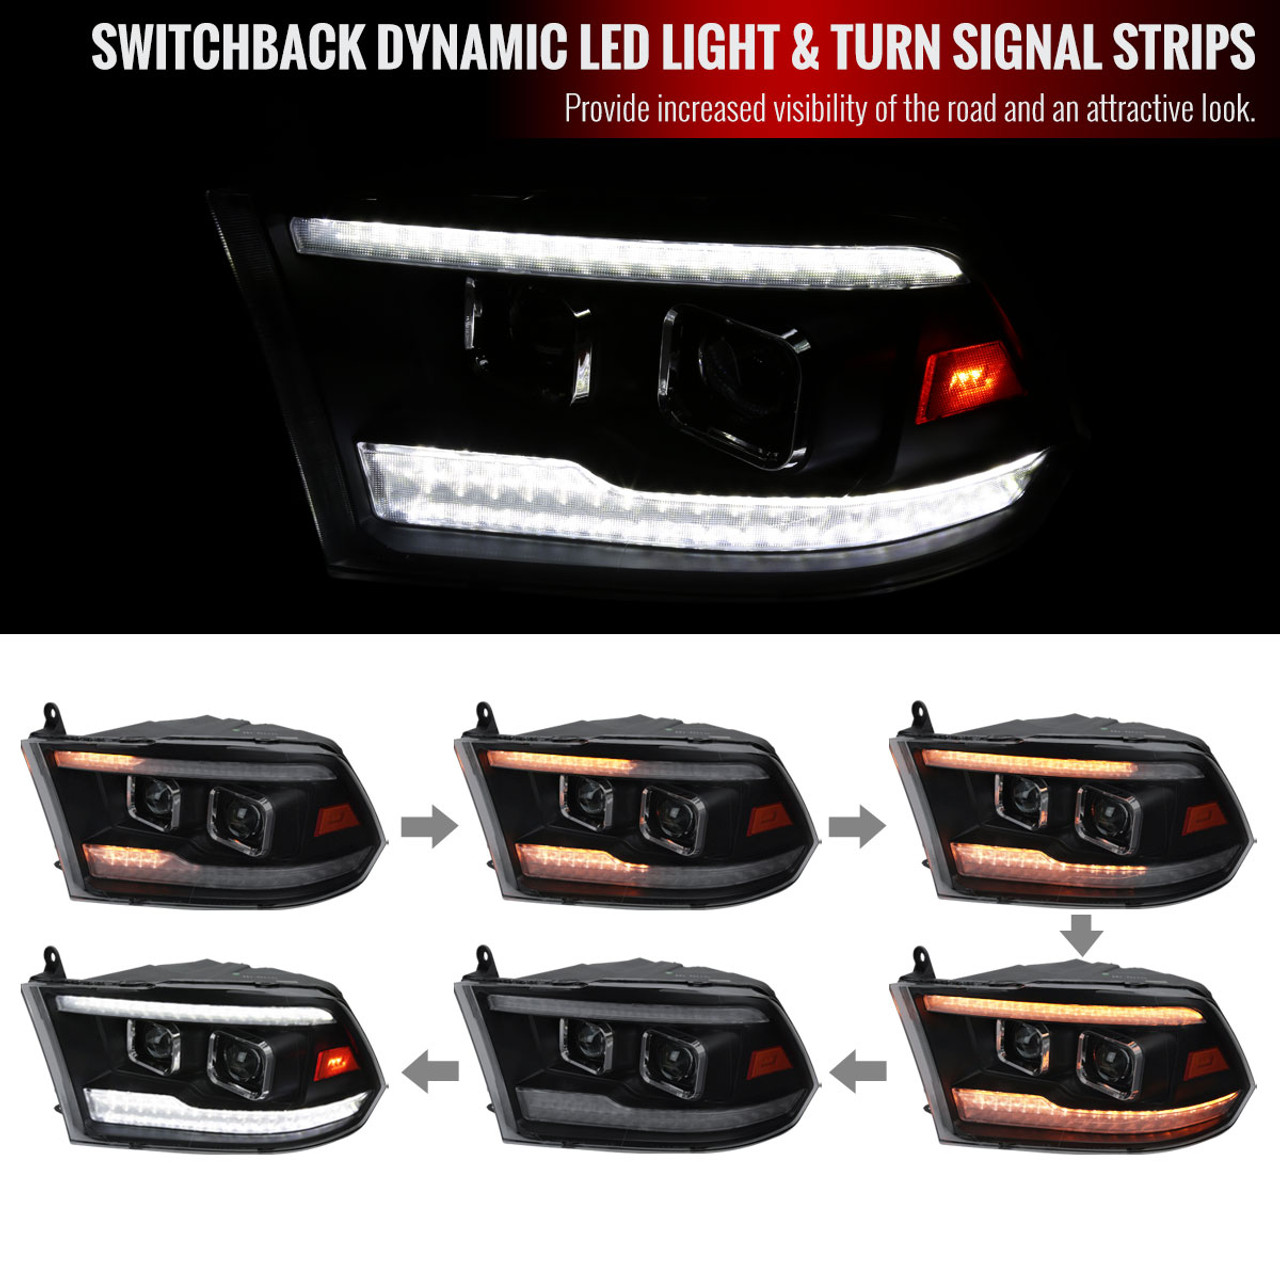  Spec-D Tuning Black Housing Smoke Lens Projector Headlights  w/Switchback LED Sequential Compatible with 2009-2018 Dodge Ram 1500,  2010-2018 Dodge Ram 2500/3500, Left + Right Pair Headlamps Assembly :  Automotive